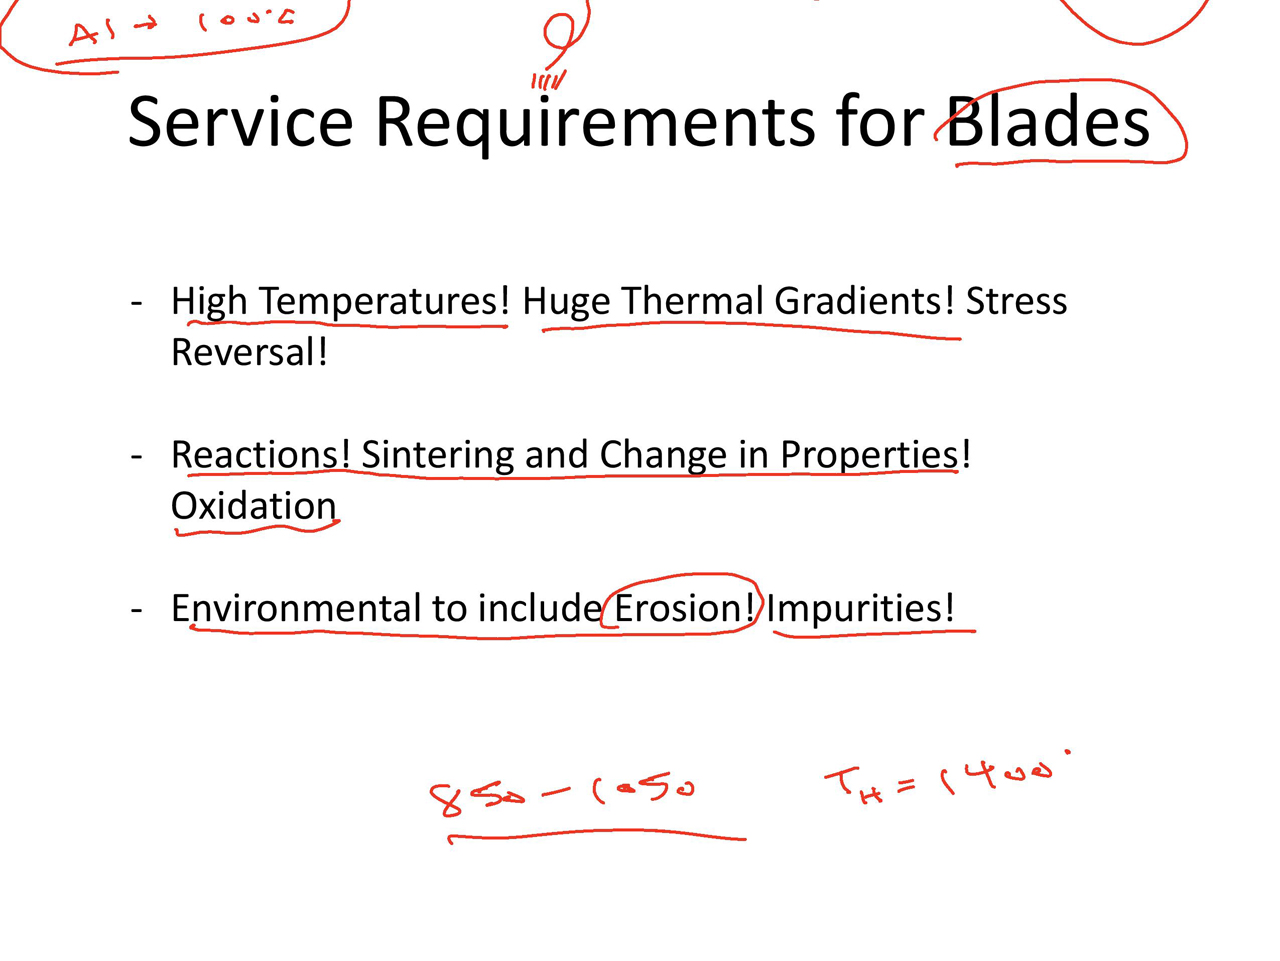 Service Requirements for Blades